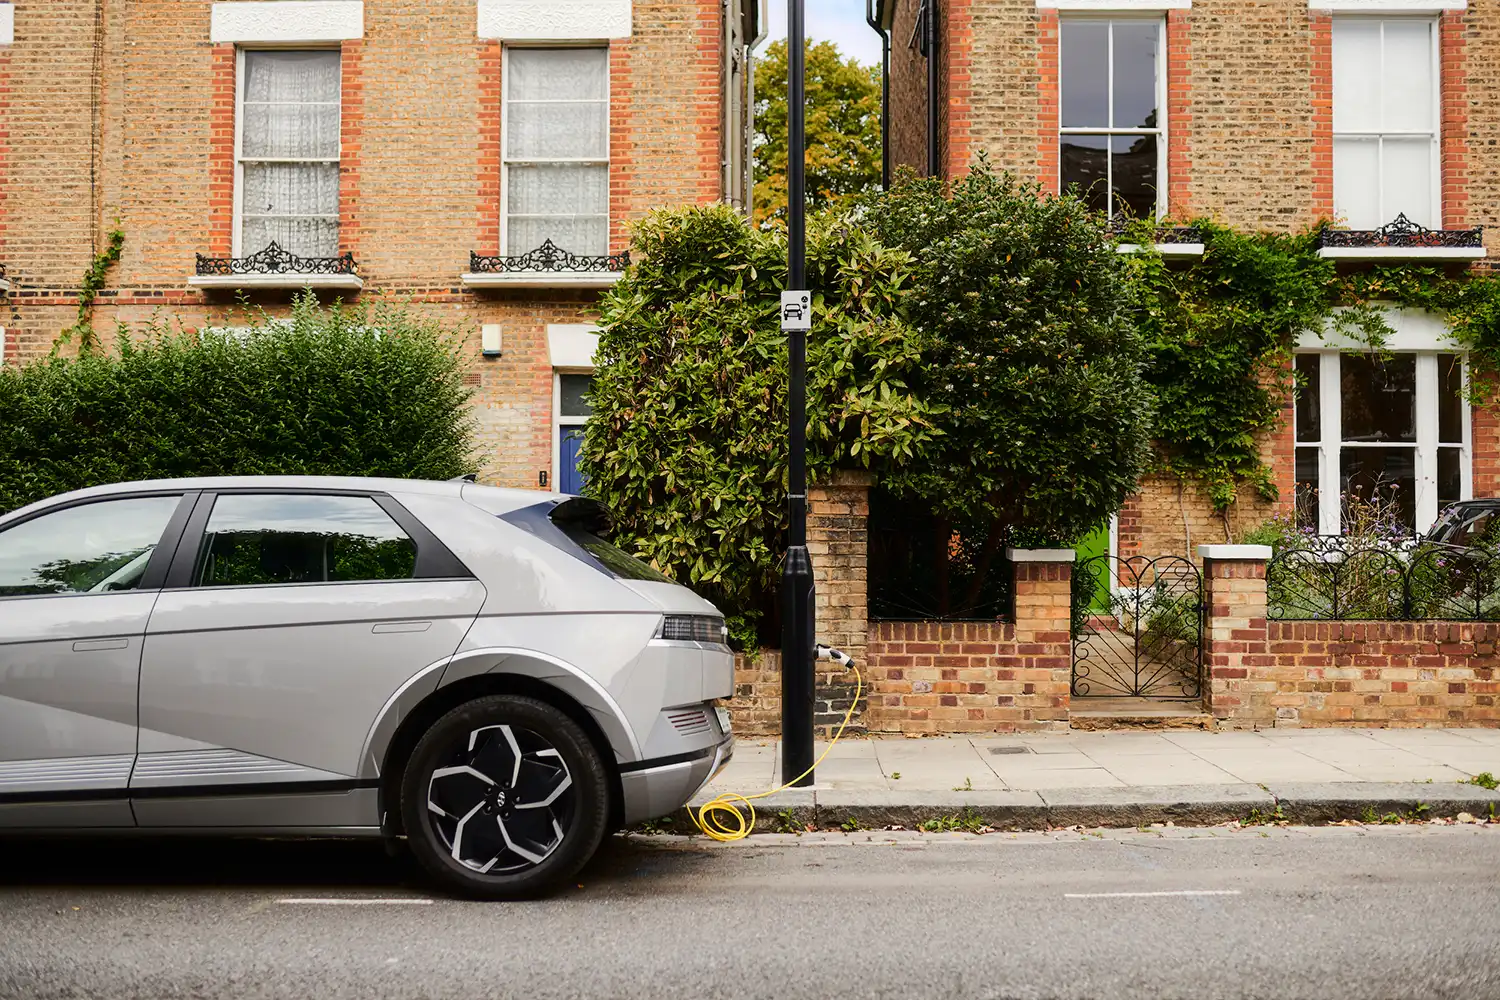 It’s time to push the accelerator on EV infrastructure – Addressing the Critical Need for More On-Street Charge points